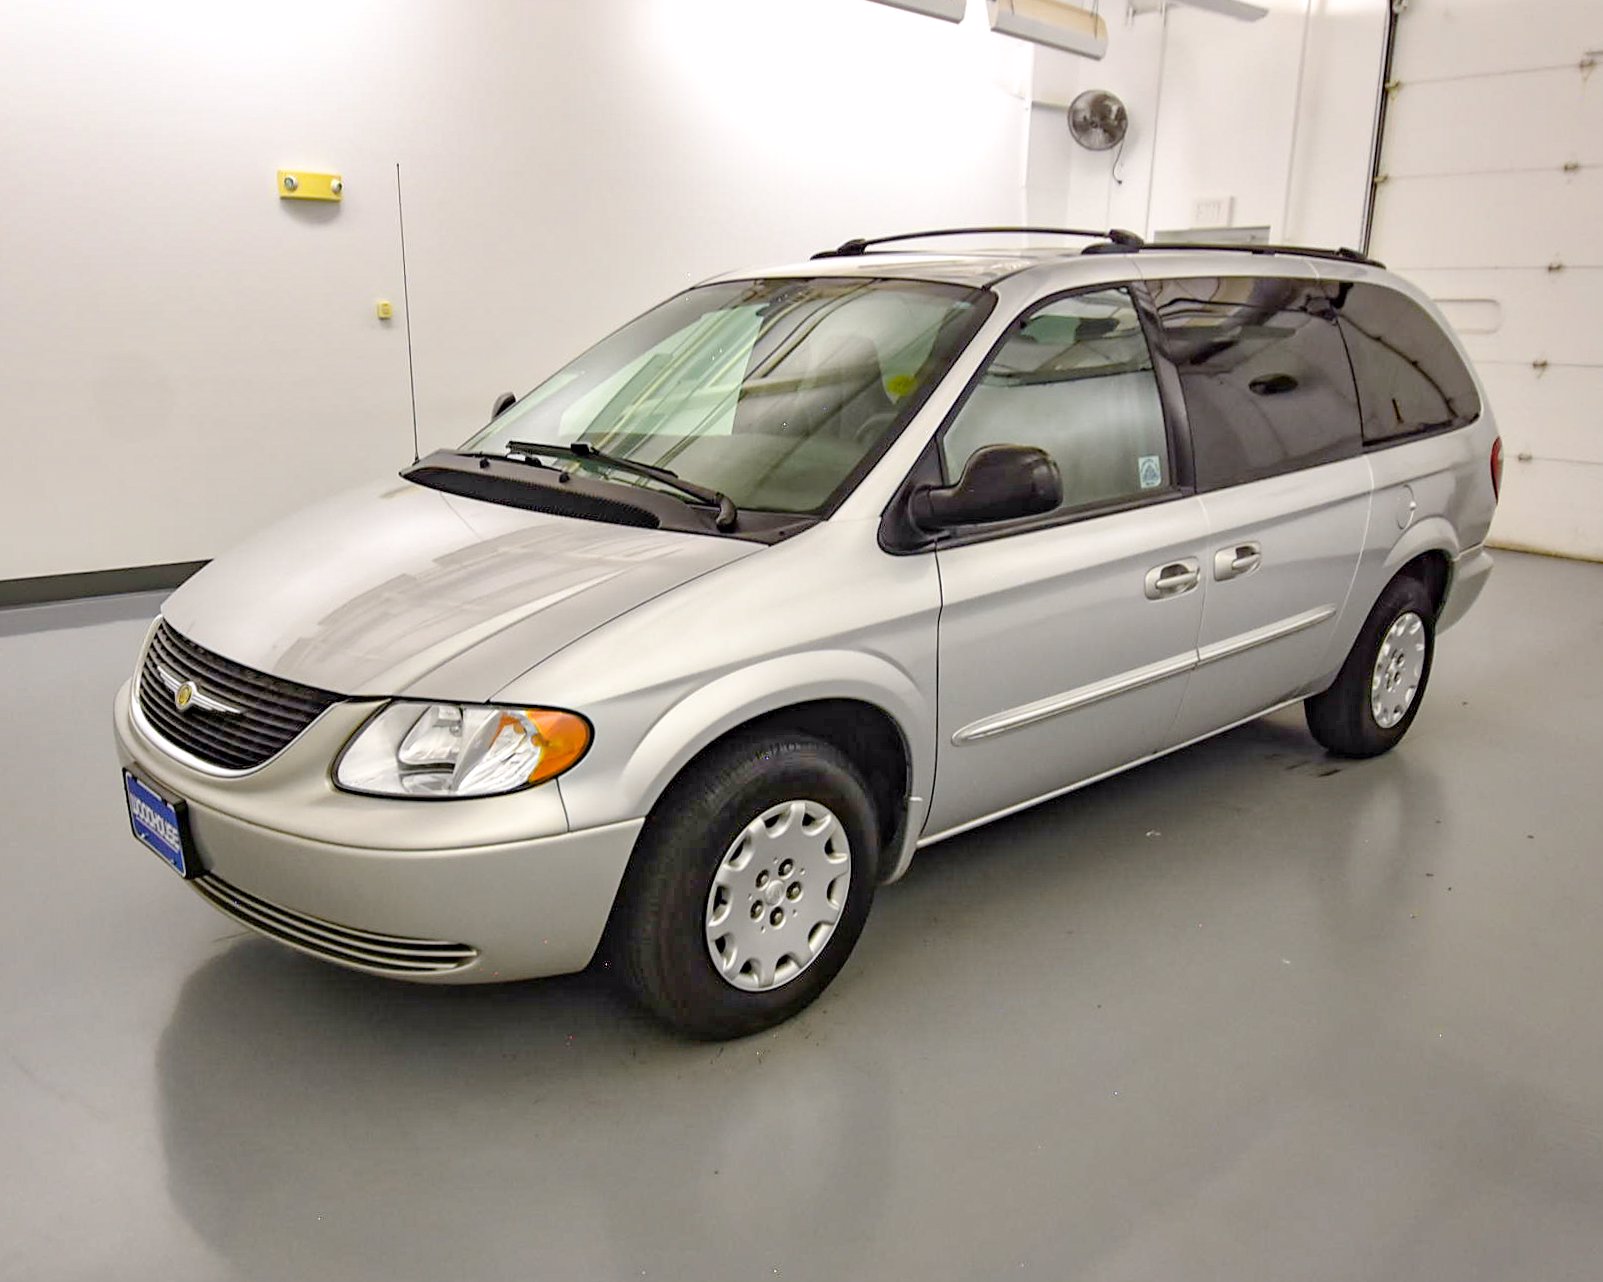 PreOwned 2003 Chrysler Town & Country LX FWD Minivan